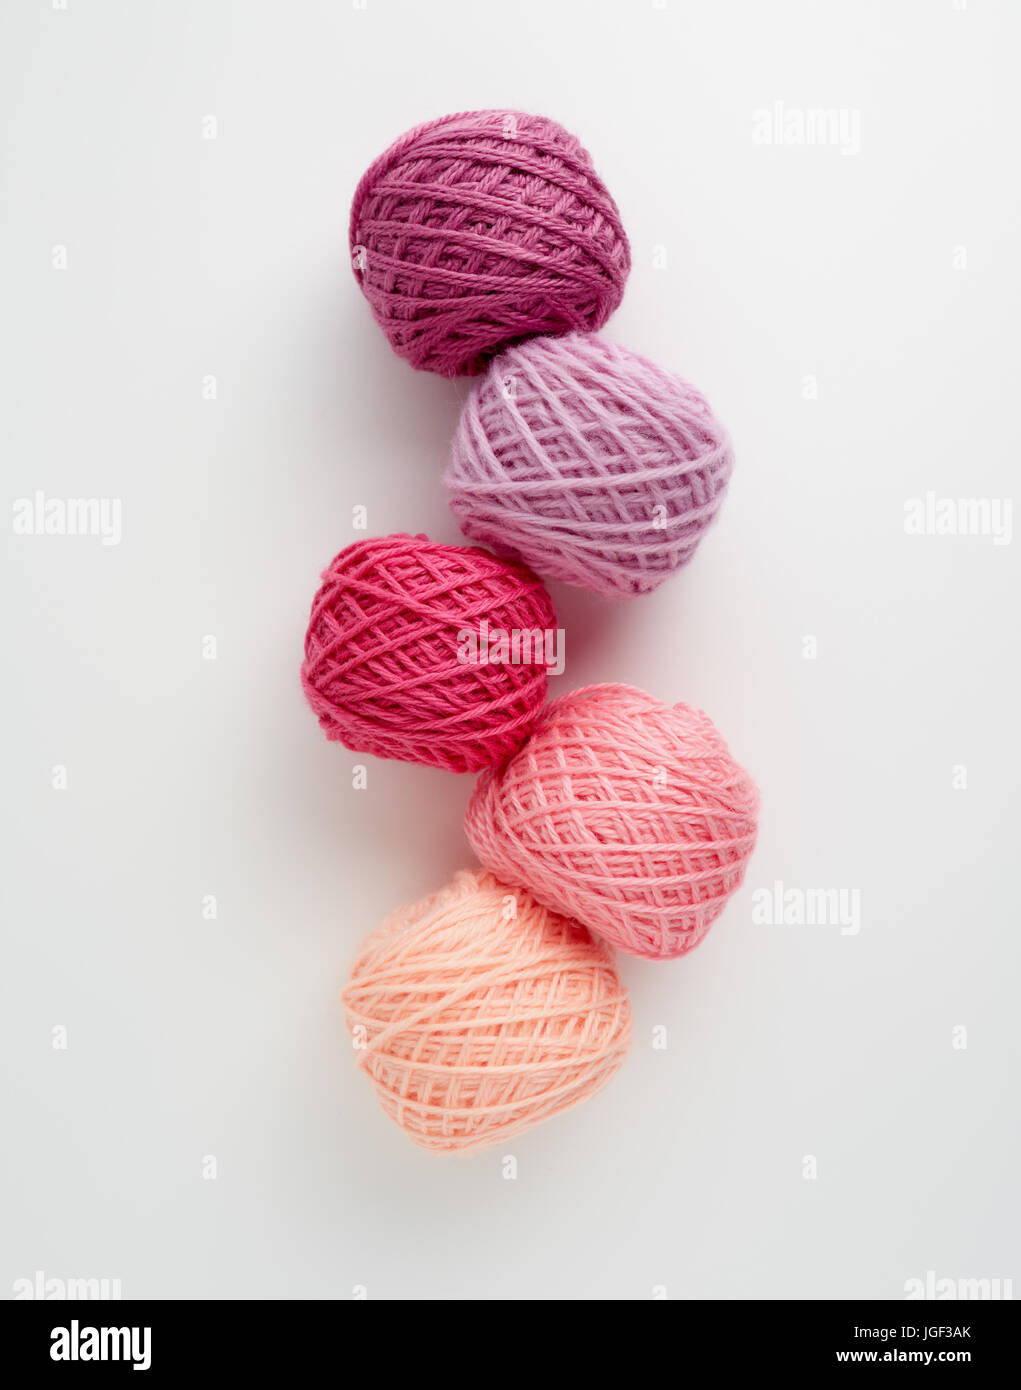 Knitting yarn balls in pink tone. Colored yarn on a white background. Skeins of wool yarn for knitting. Stock Photo